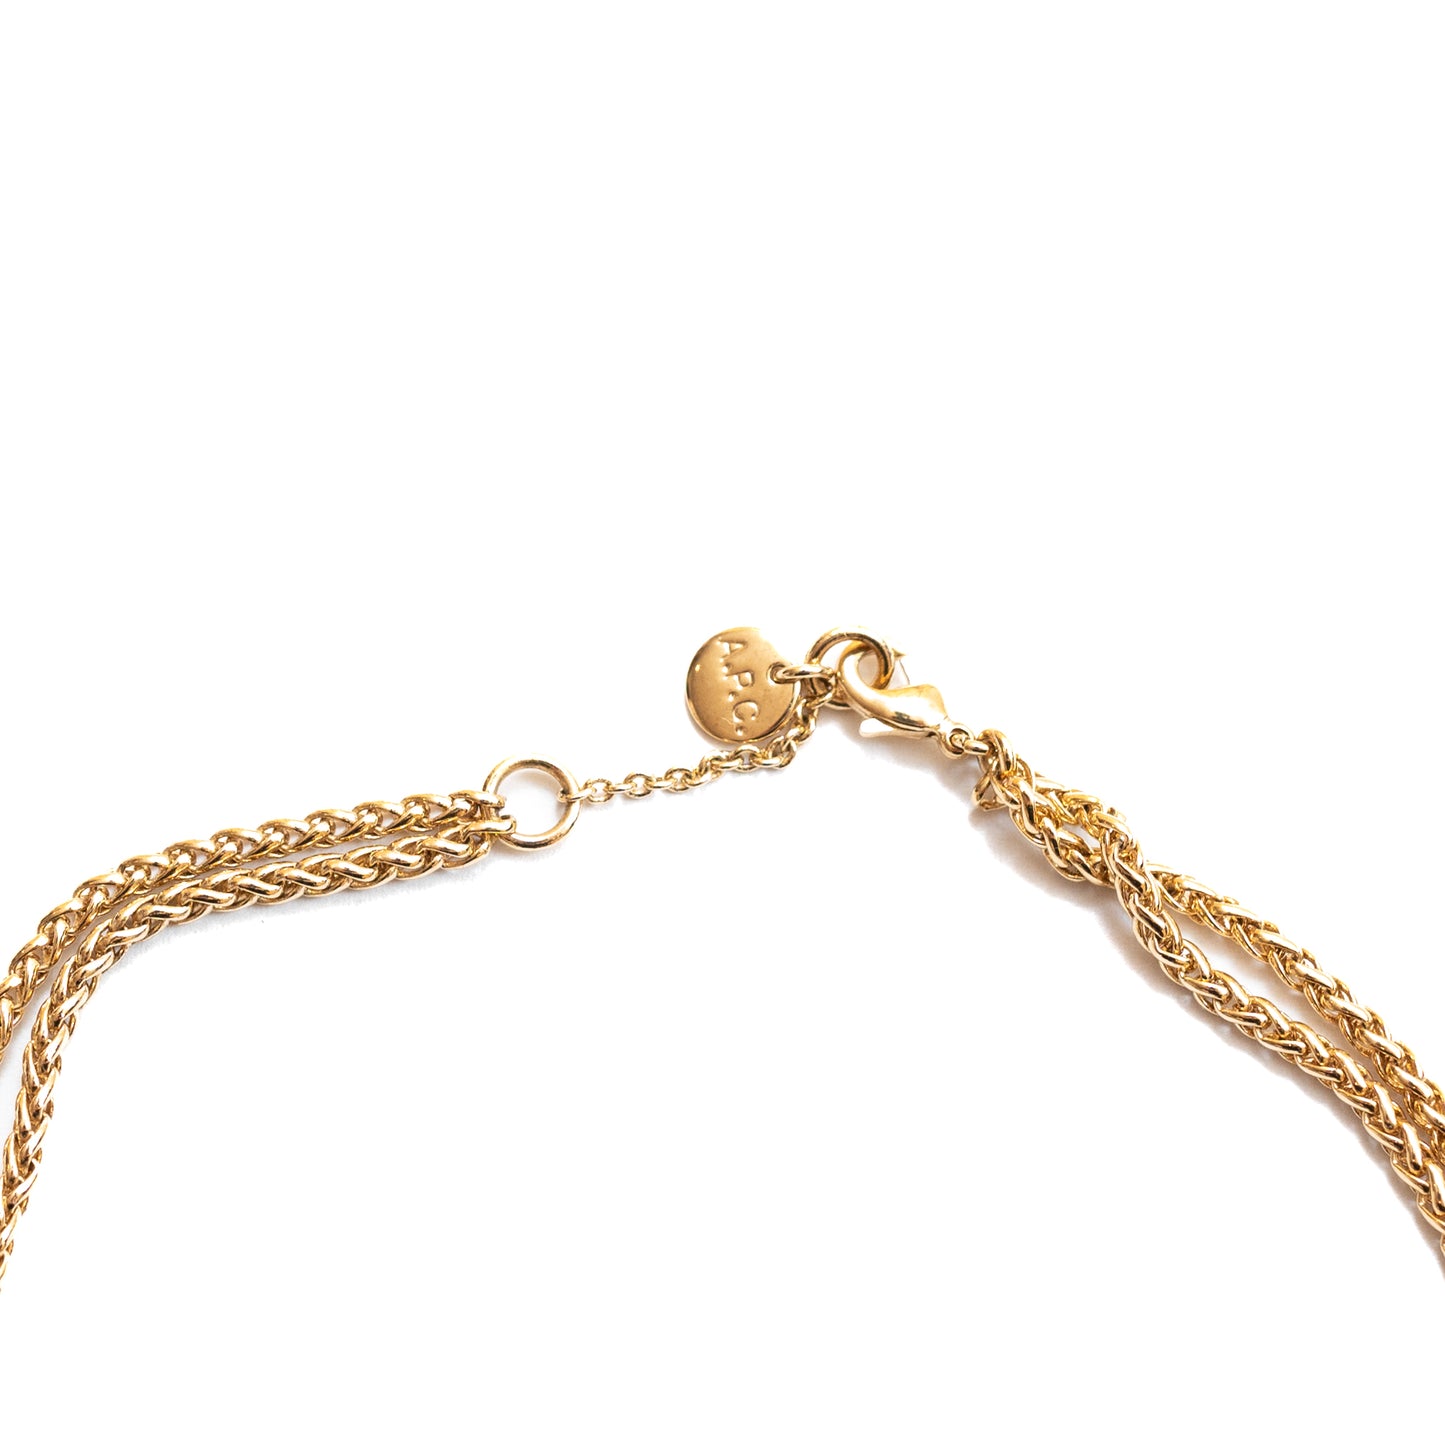 A.P.C Rings Necklace